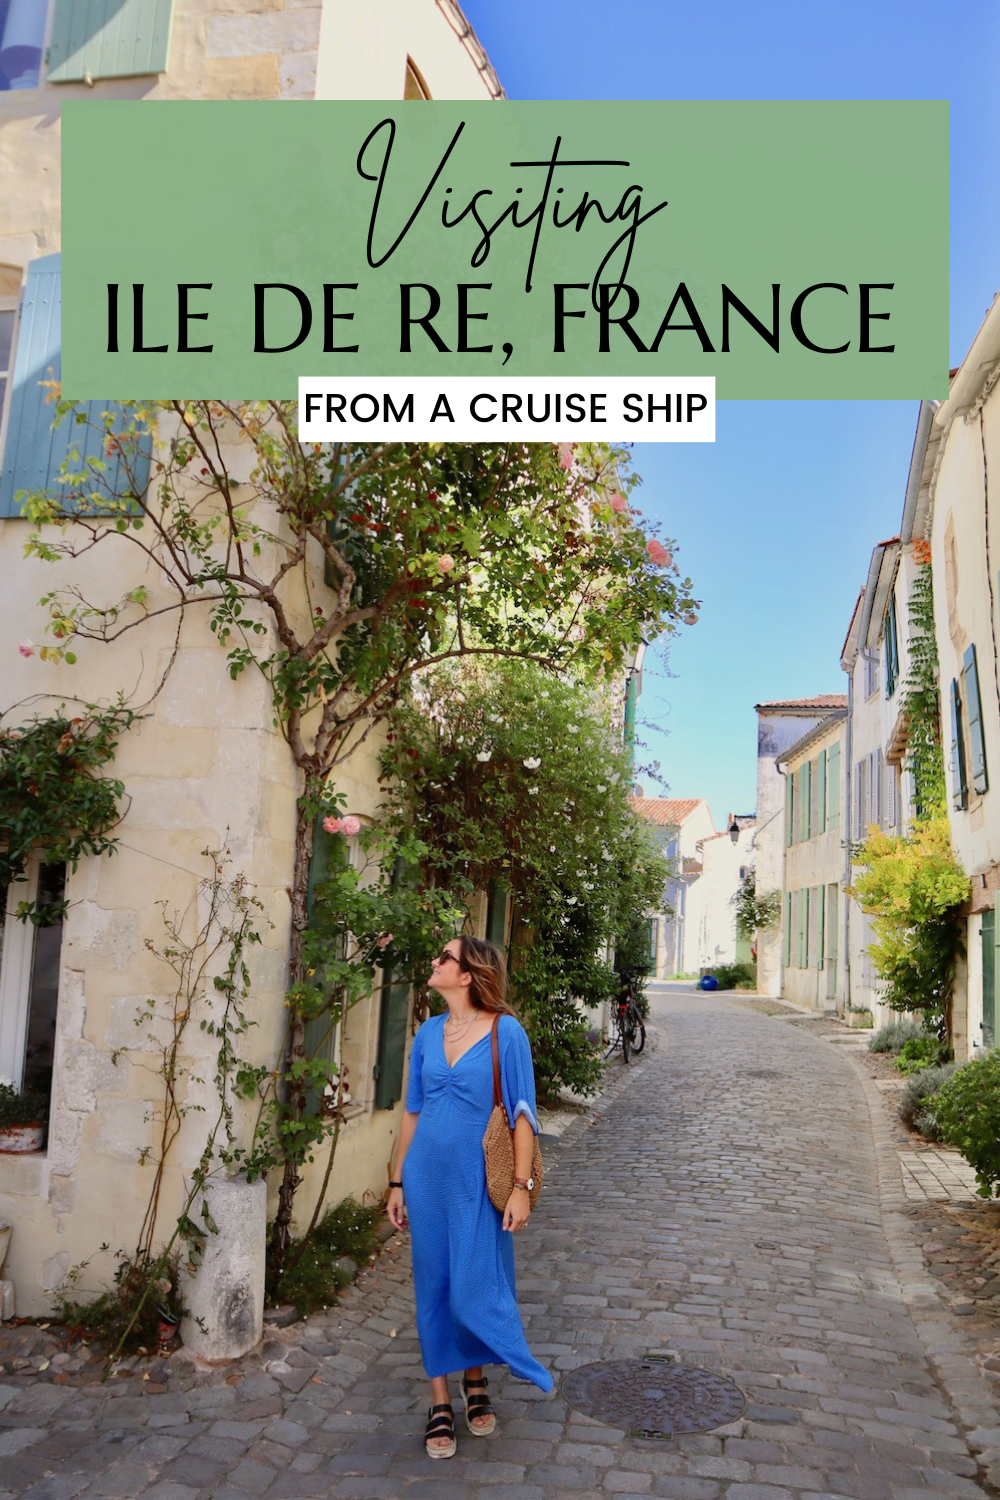 Postcards from Ile de Re France: Visiting Ile de Re from a cruise